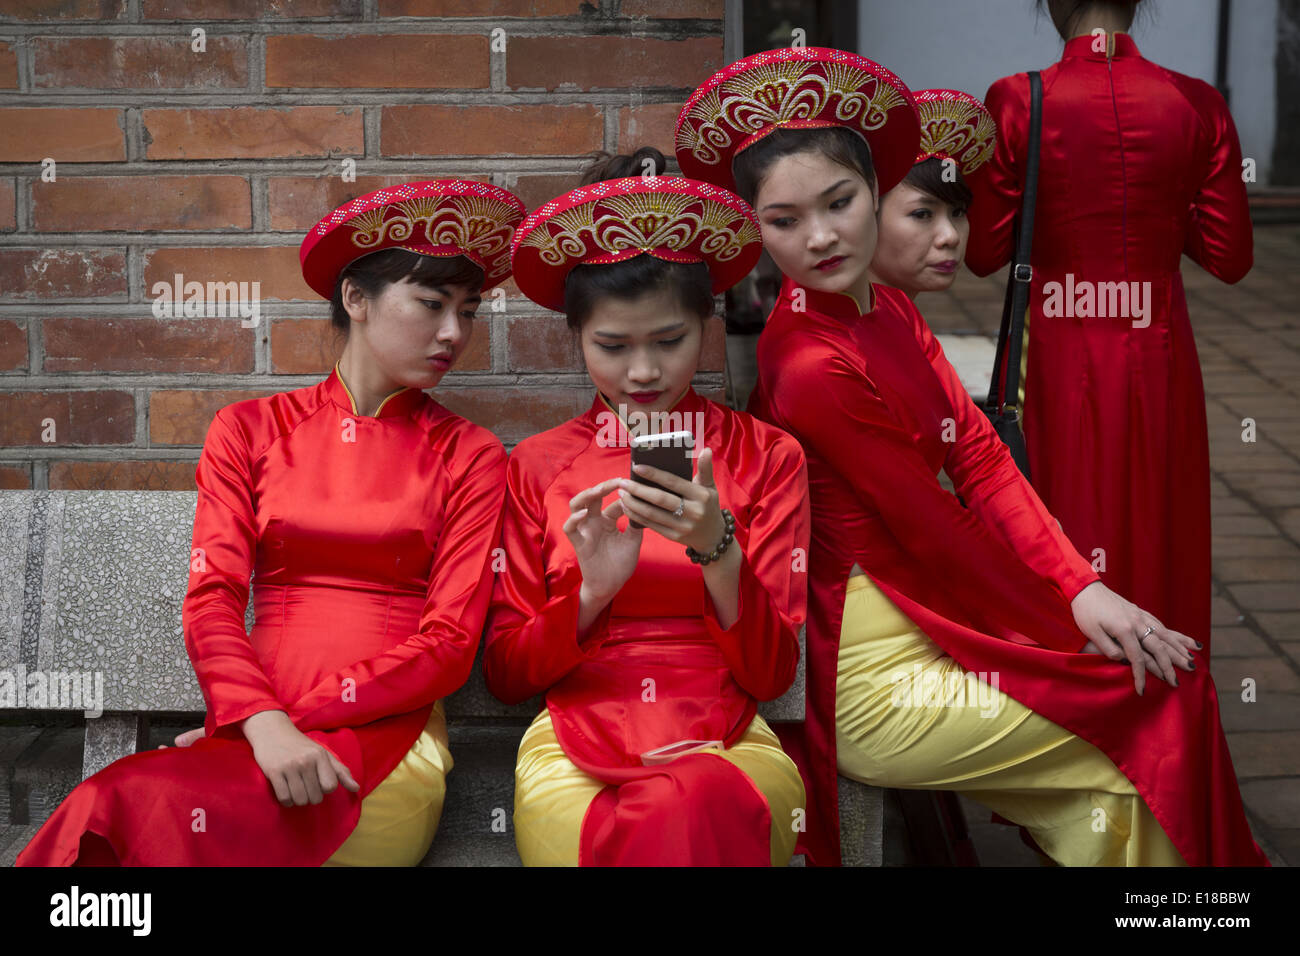 A group of women dressed in traditional clothing, looking at the phone from one of them. Stock Photo